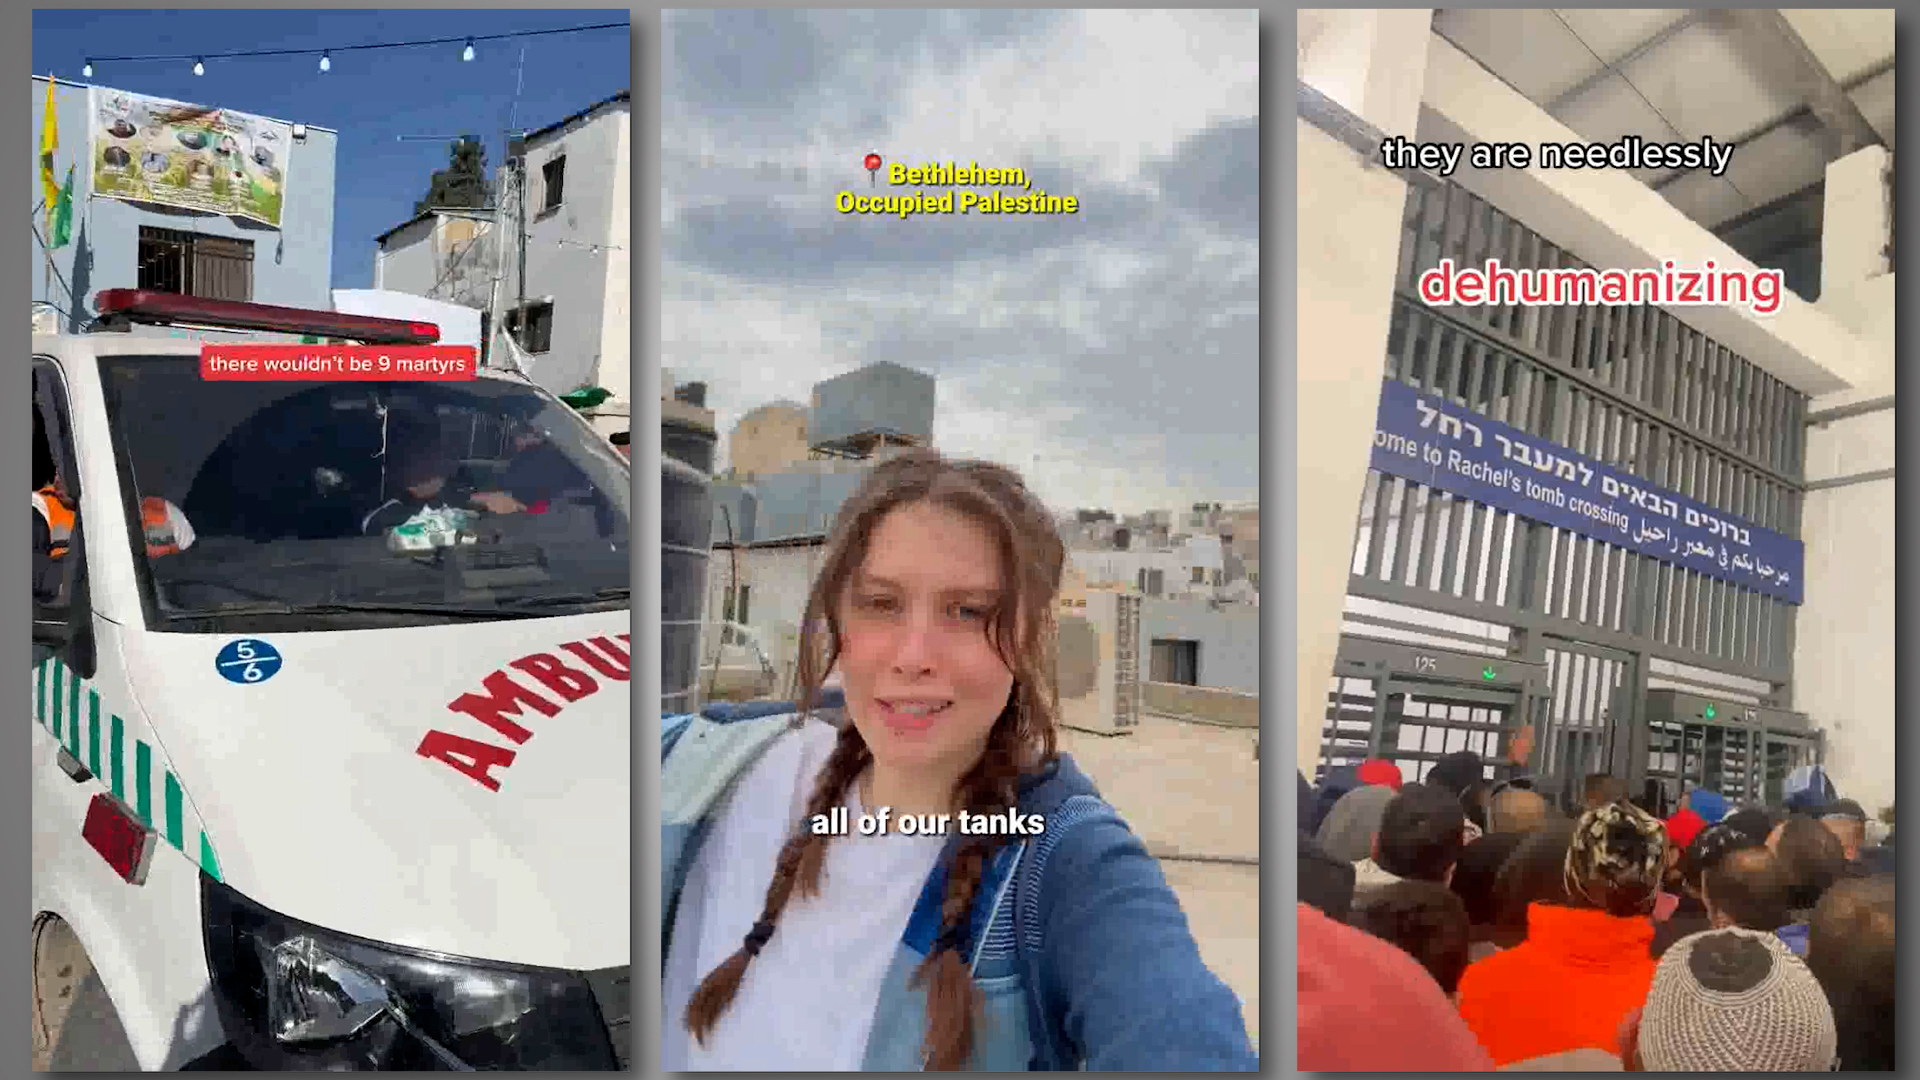 TikTok streamers are staging 'Israel vs. Palestine' live matches to cash in  on virtual gifts